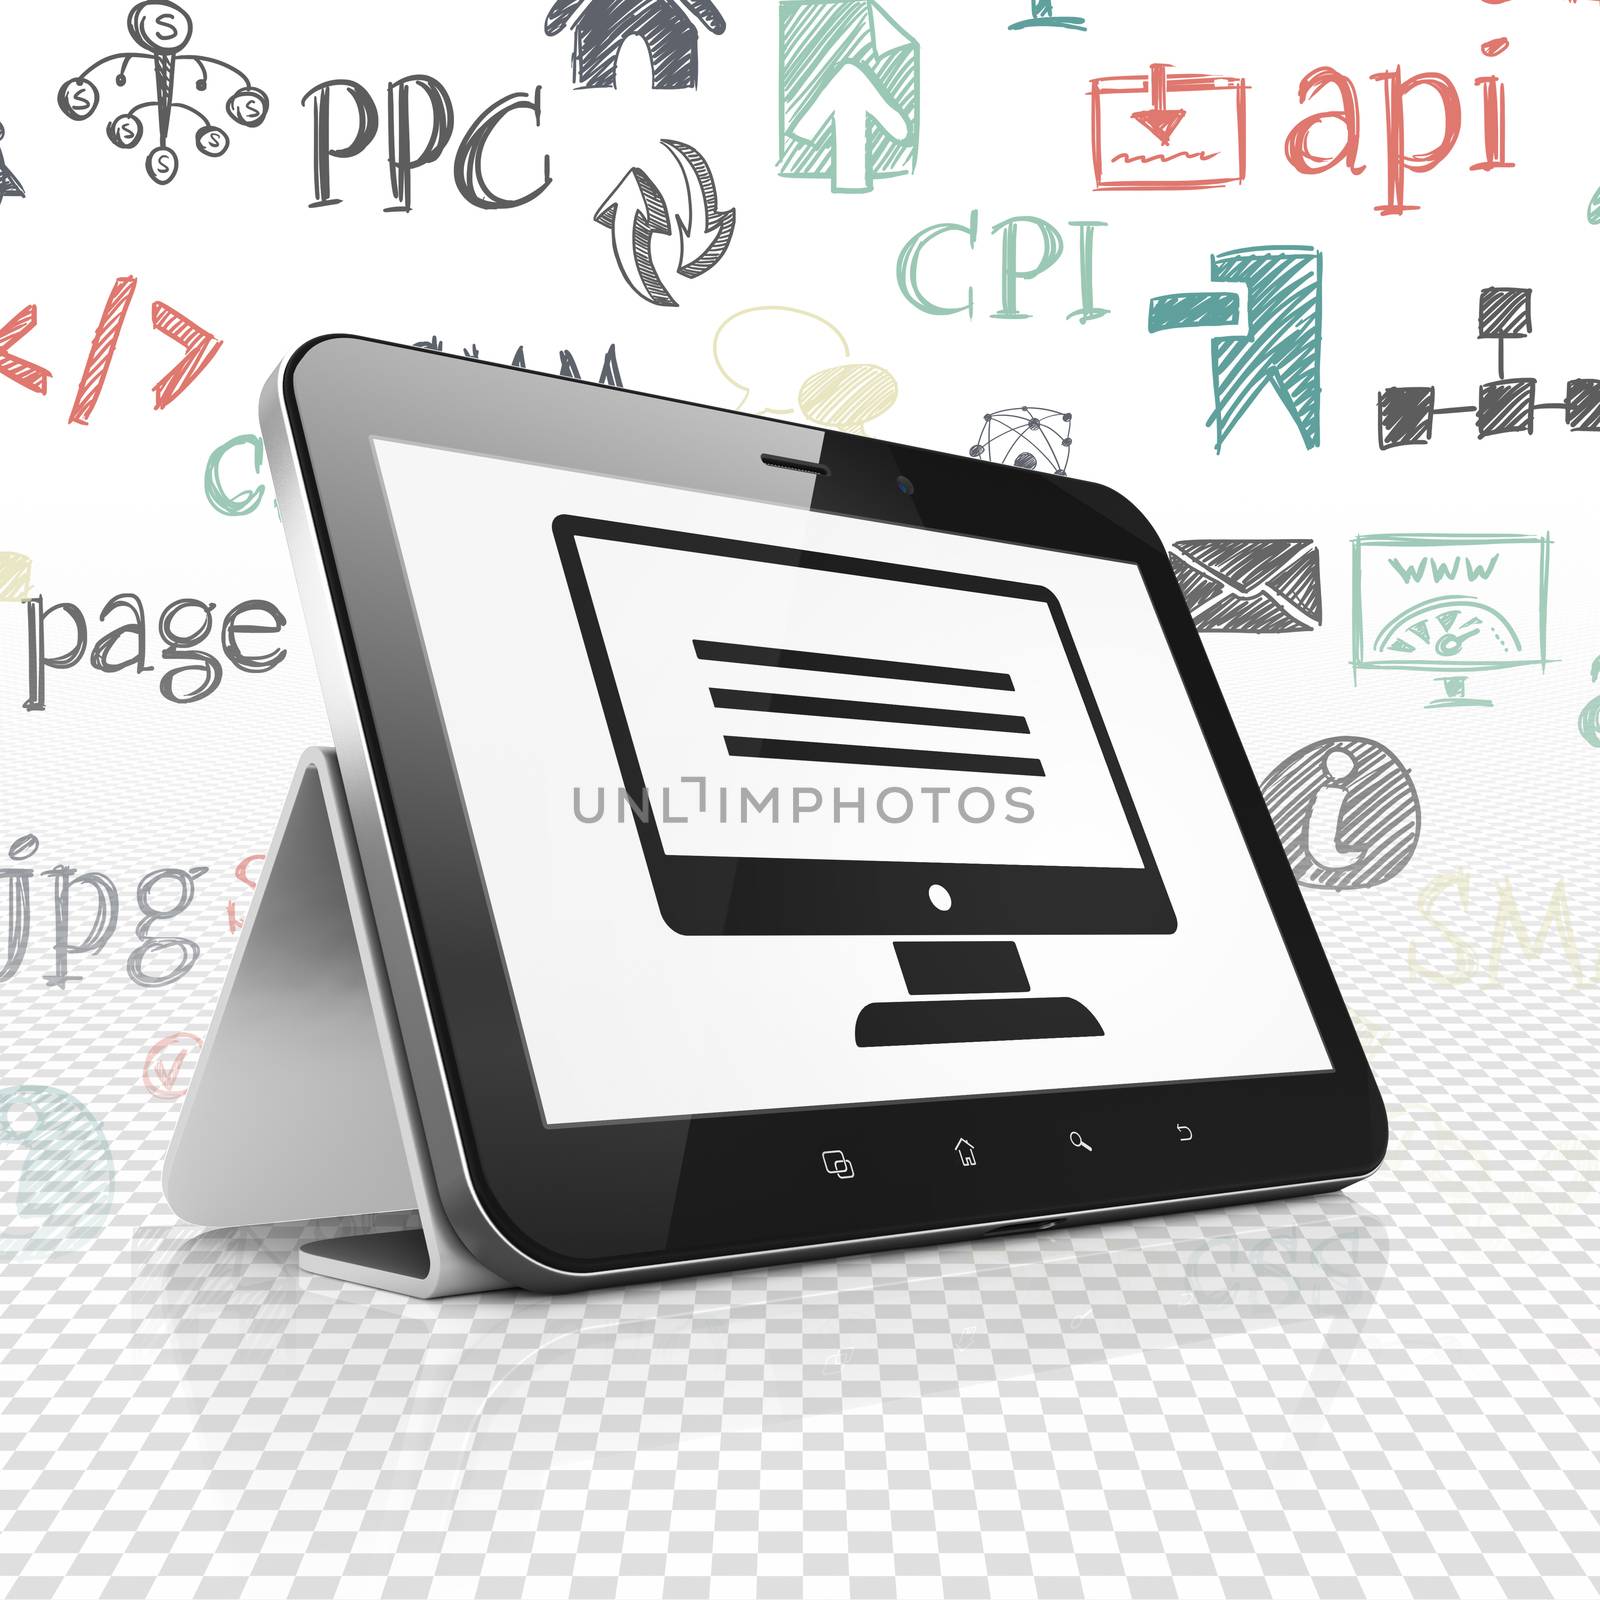 Web design concept: Tablet Computer with  black Monitor icon on display,  Hand Drawn Site Development Icons background, 3D rendering